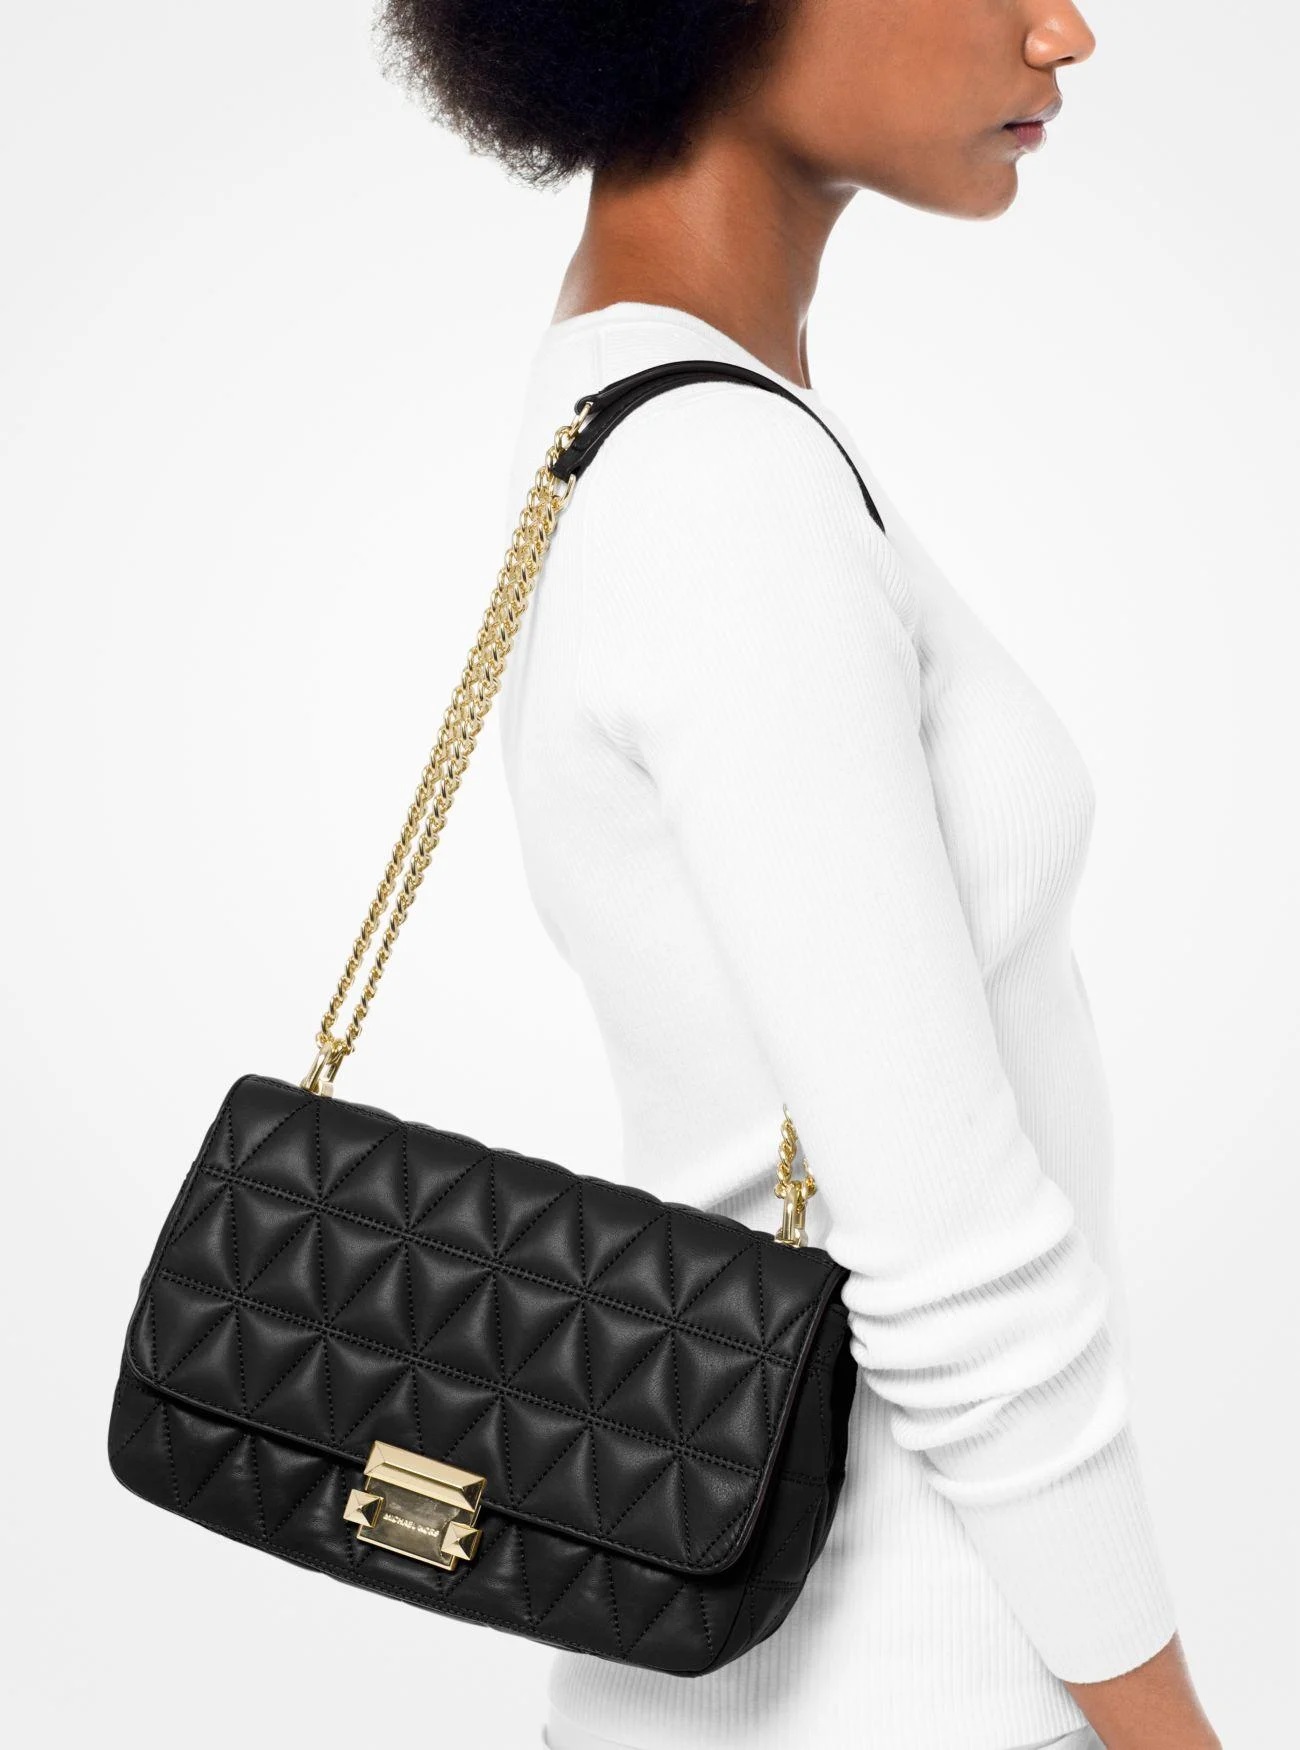 TÚI XÁCH NỮ MICHAEL KORS SLOAN LARGE QUILTED LEATHER SHOULDER BAG 2